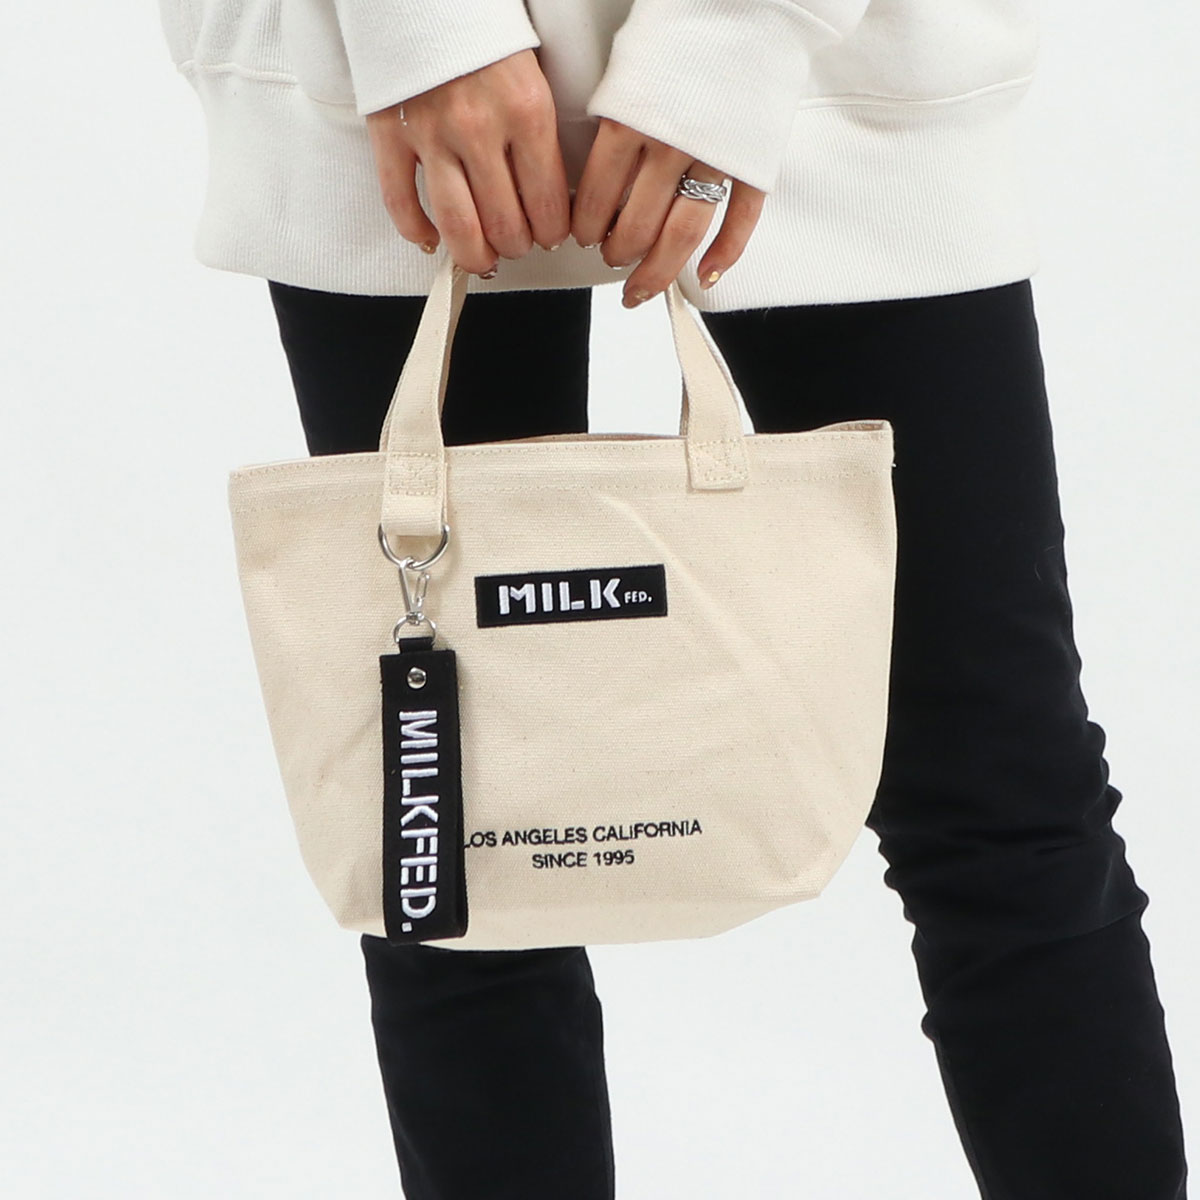 MILKFED. ミルクフェド BAR AND UNDER LOGO LUNCH TOTE トートバッグ